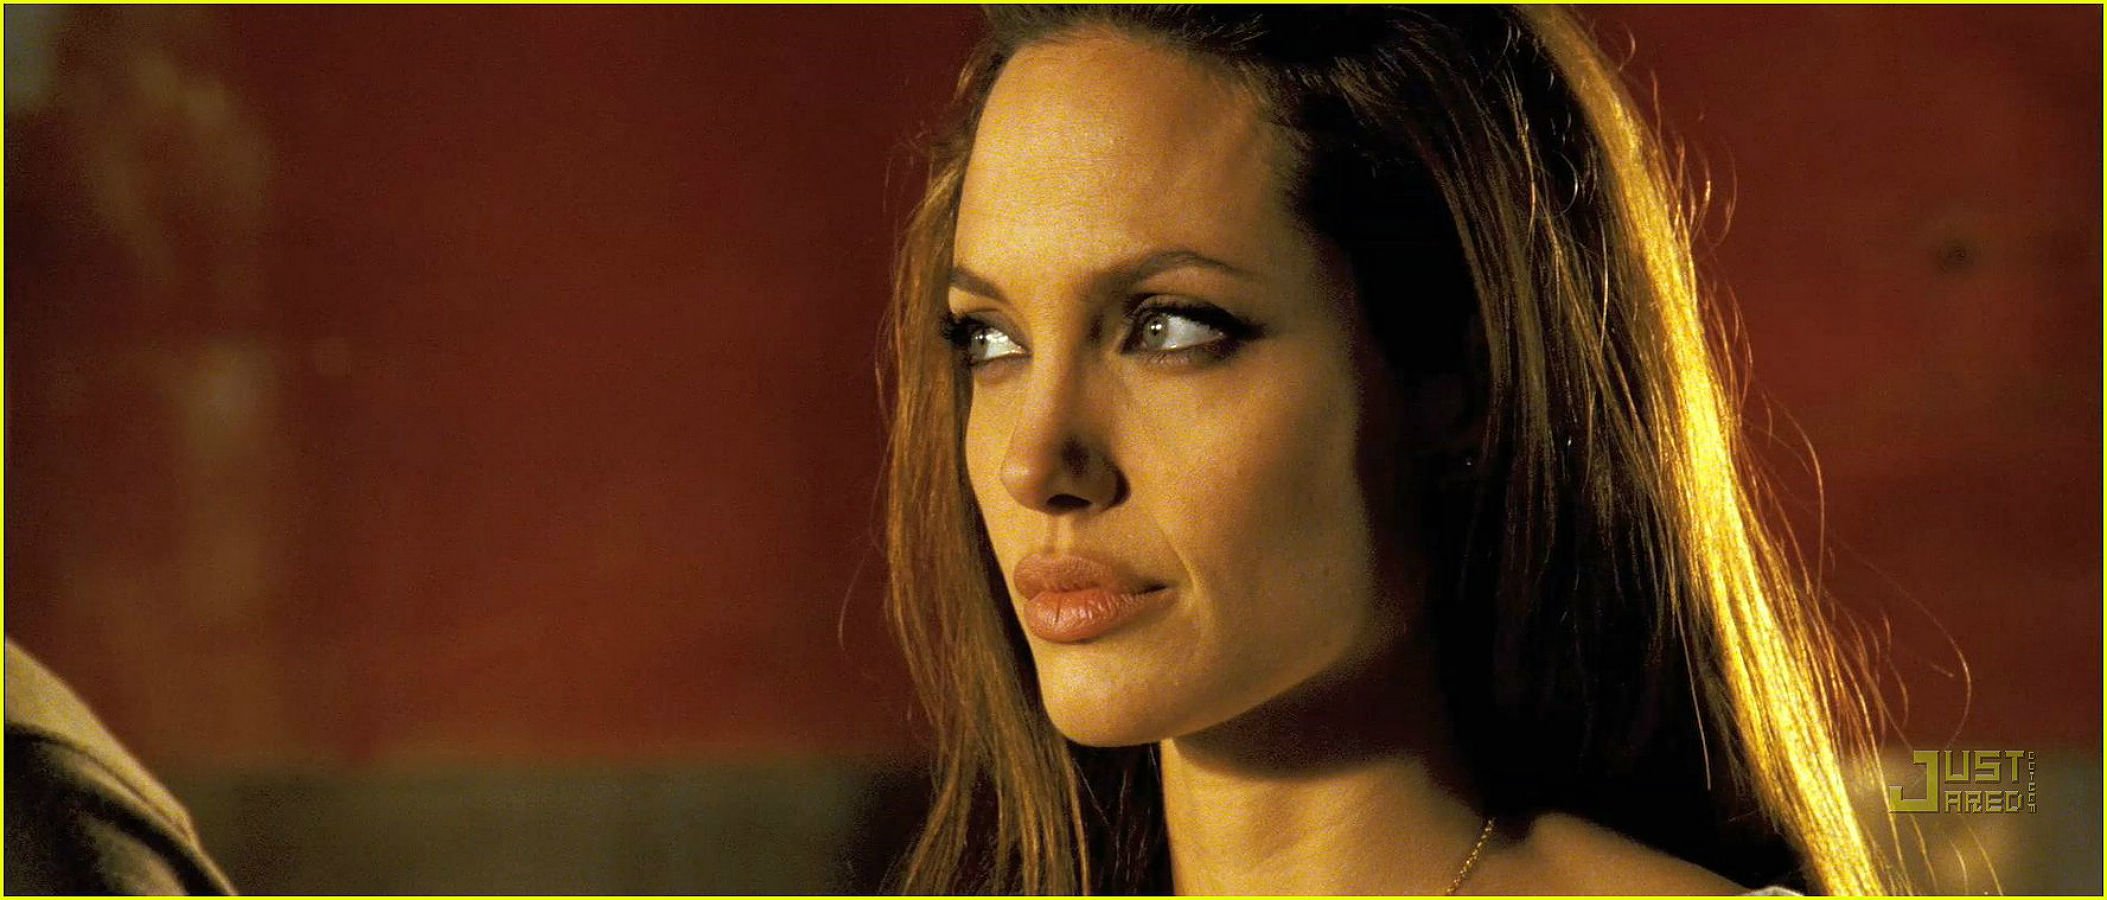 wanted, Action, Crime, Fantasy, Sci fi, Jolie,  50 Wallpaper